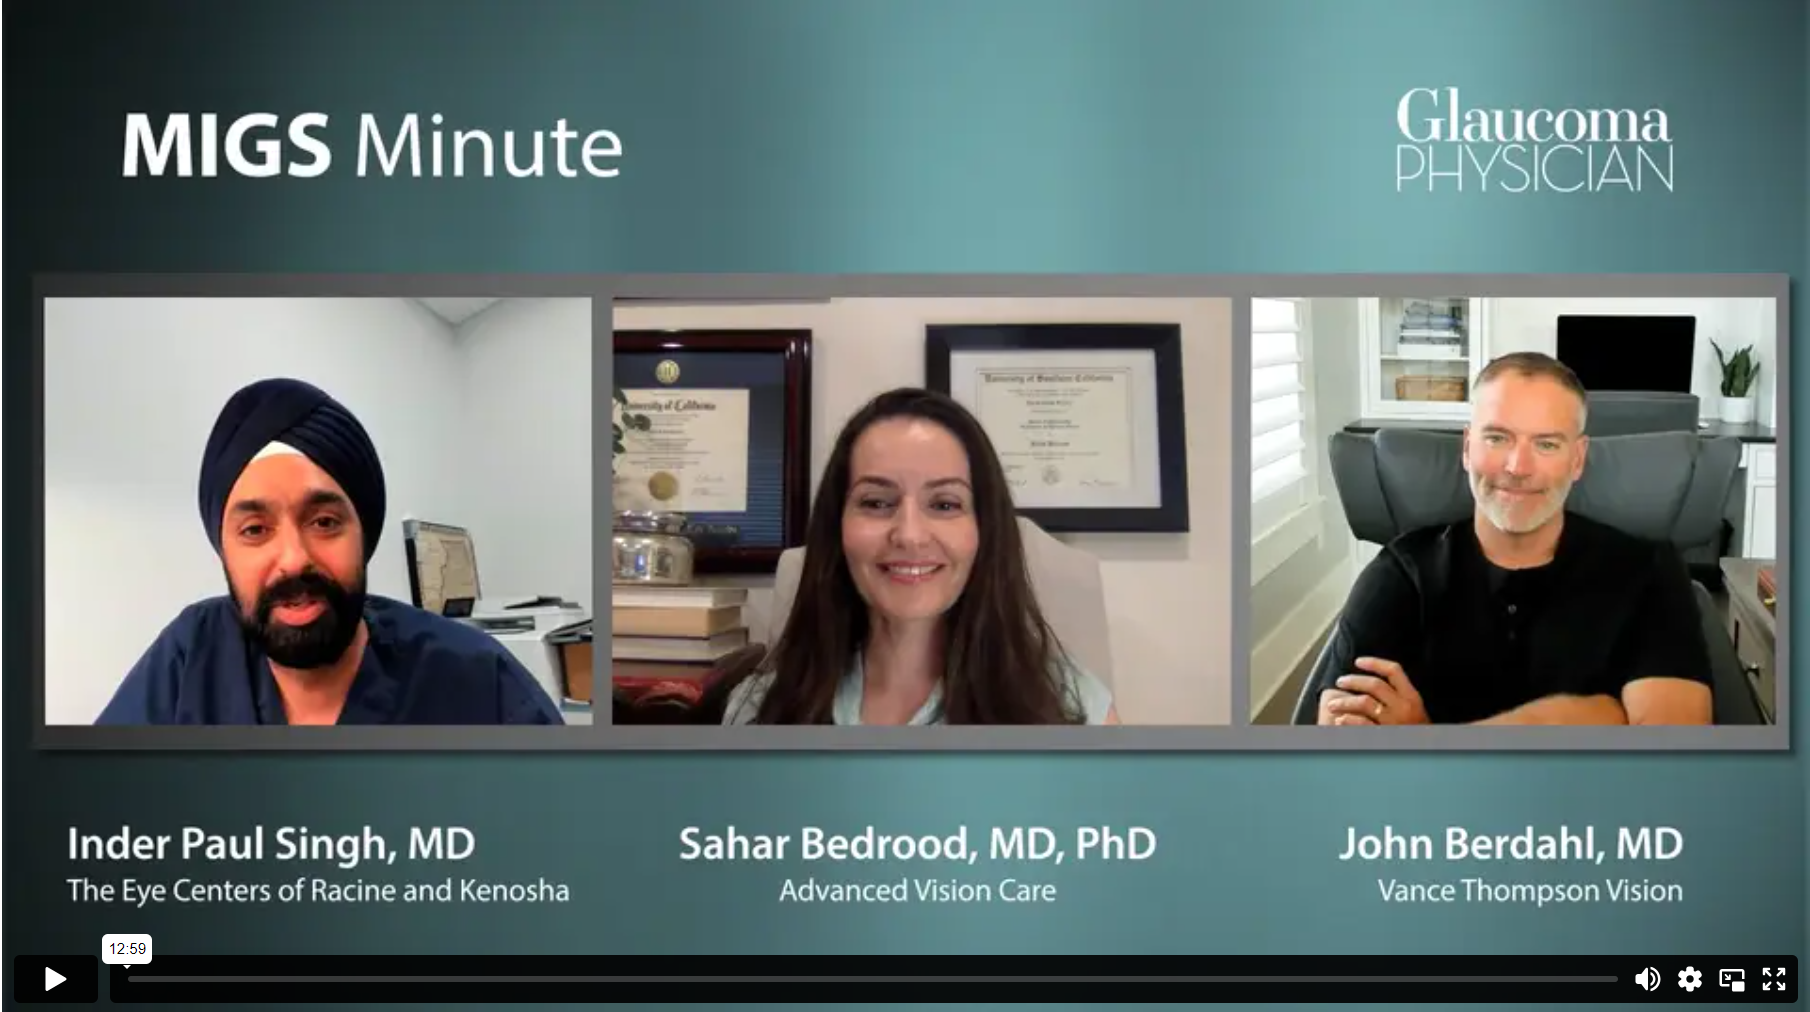 Episode 9: Inder Paul Singh, MD, Sahar Bedrood, MD, PhD, and John Berdahl, MD discuss talking to patients about their treatment journey.